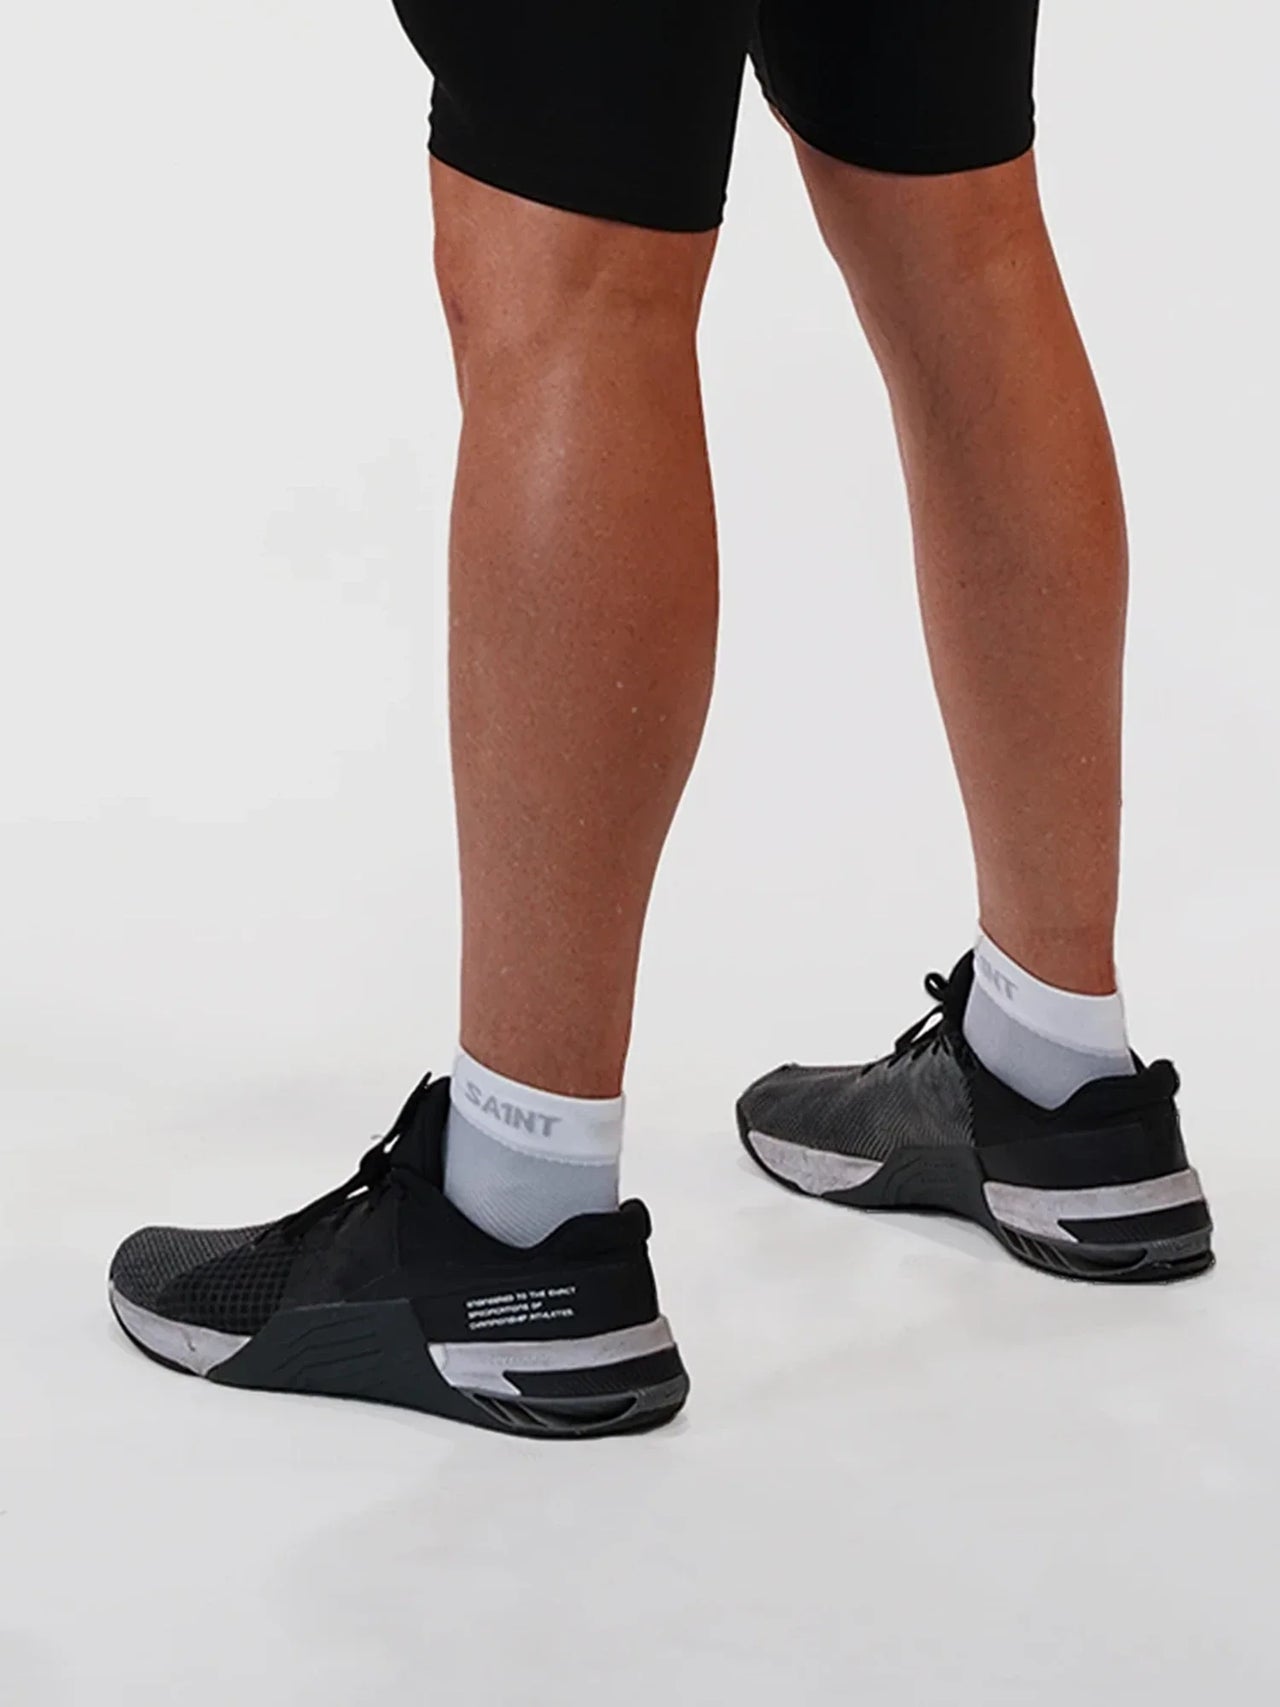 **Low-Cut Ankle Support Socks - White**